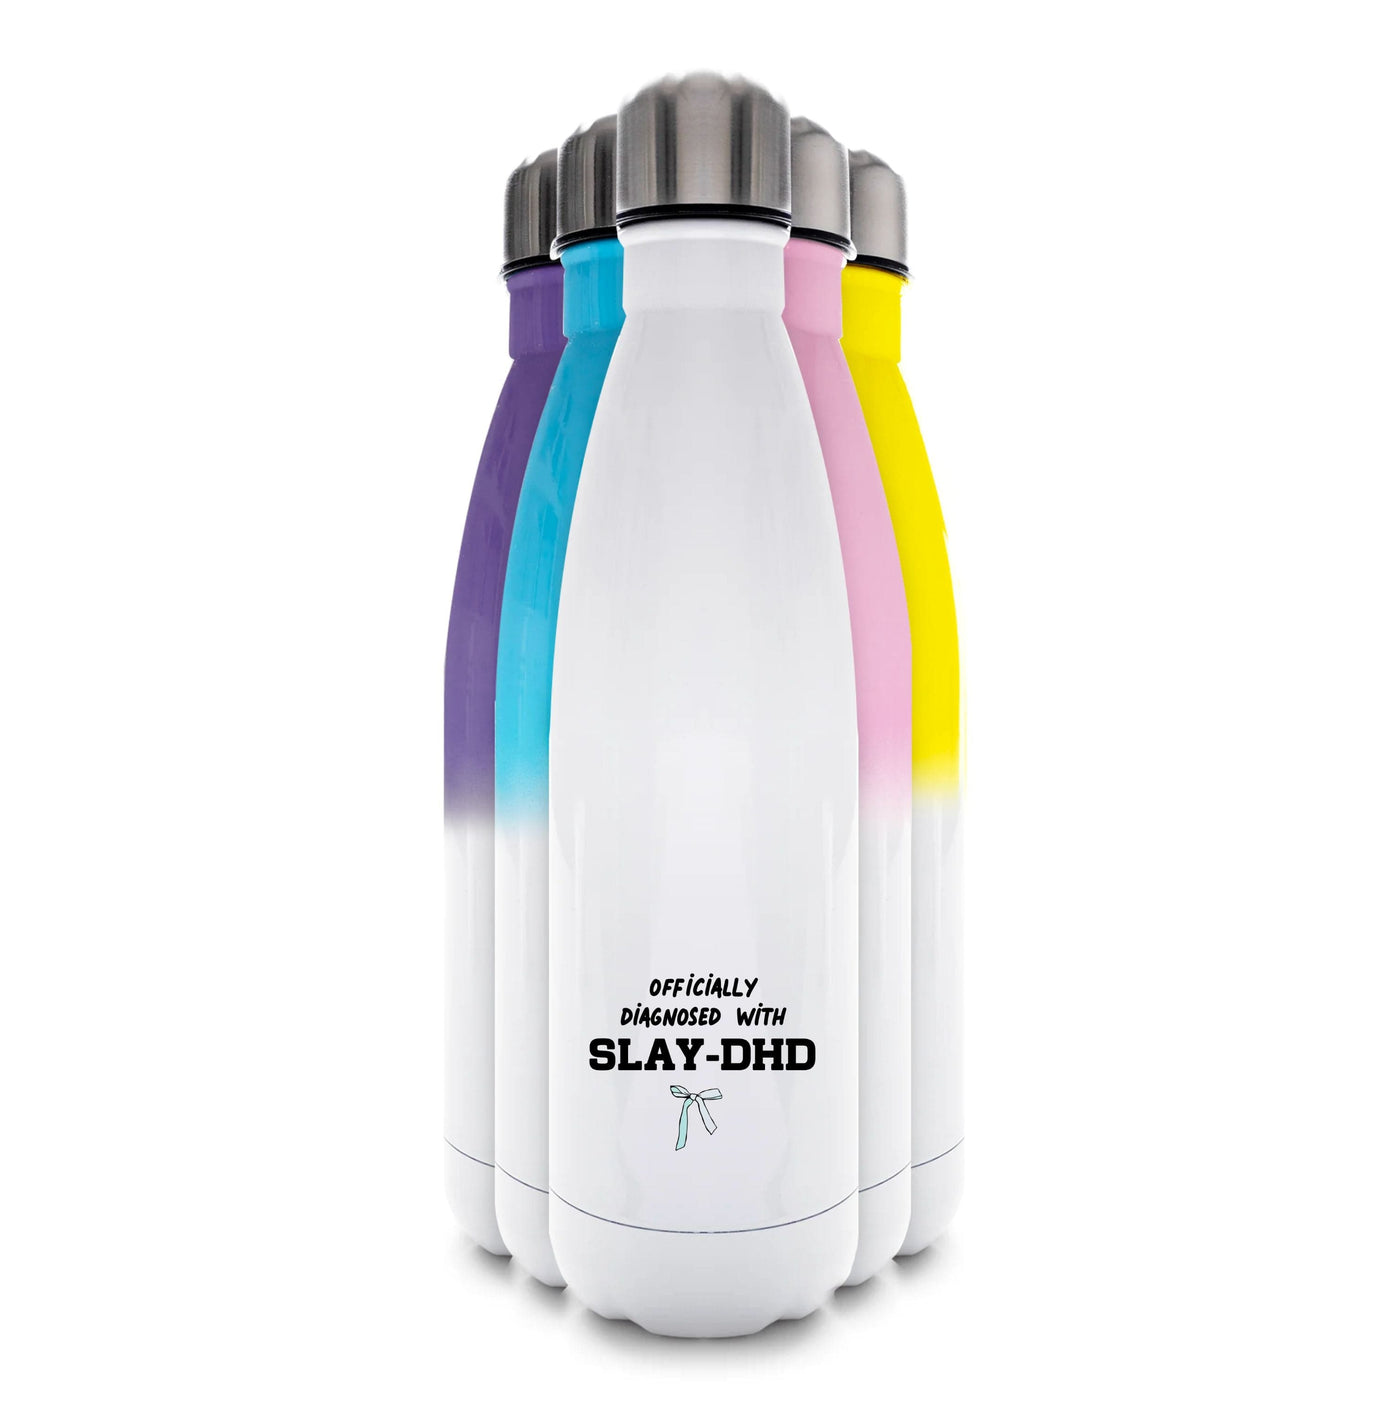 Officially Diagnosed With Slay-DHD - TikTok Trends Water Bottle